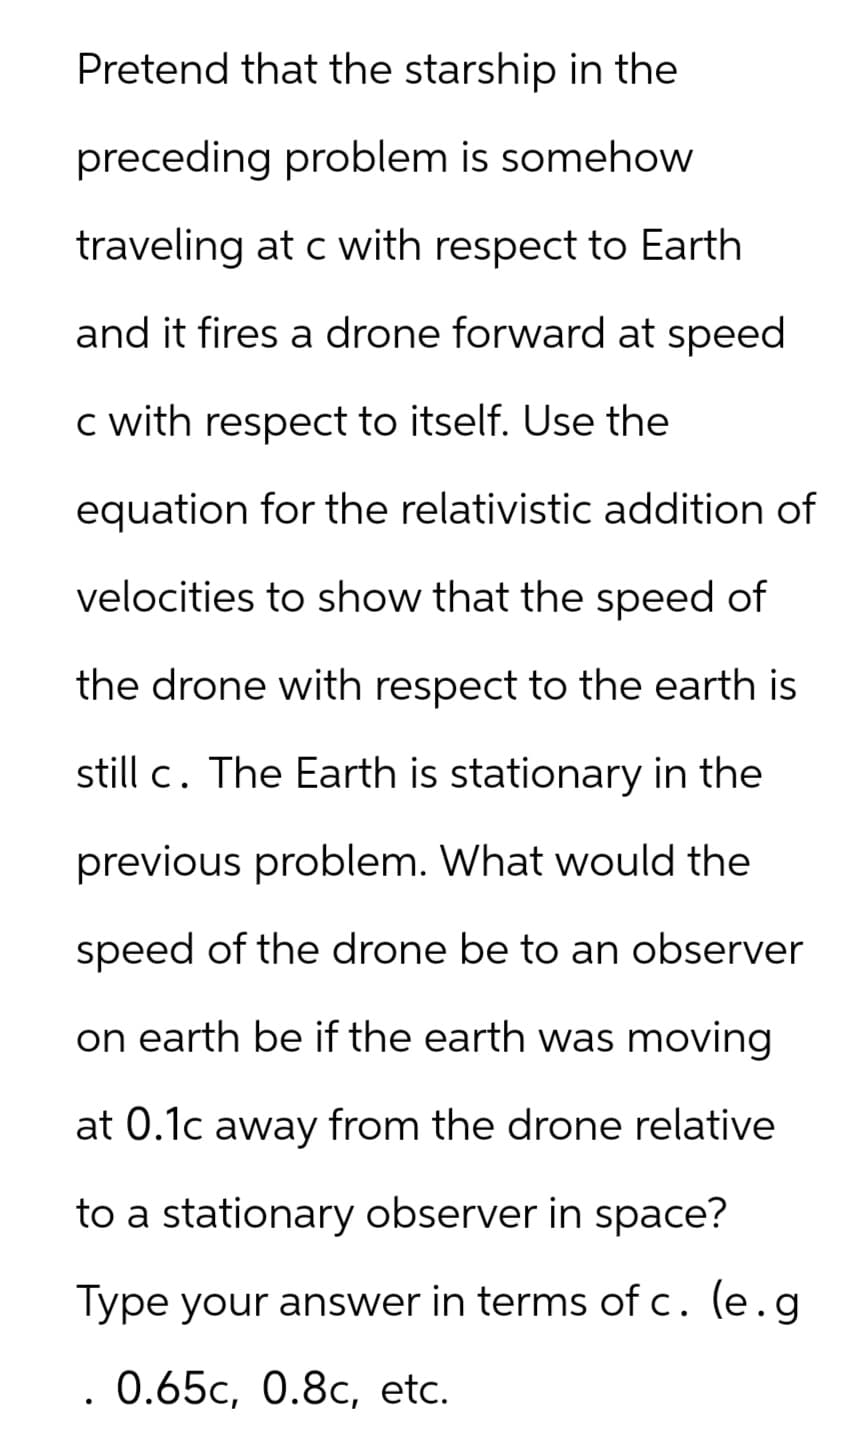 Pretend that the starship in the
preceding problem is somehow
traveling at c with respect to Earth
and it fires a drone forward at speed
c with respect to itself. Use the
equation for the relativistic addition of
velocities to show that the speed of
the drone with respect to the earth is
still c. The Earth is stationary in the
previous problem. What would the
speed of the drone be to an observer
on earth be if the earth was moving
at 0.1c away from the drone relative
to a stationary observer in space?
Type your answer in terms of c. (e.g.
0.65c, 0.8c, etc.